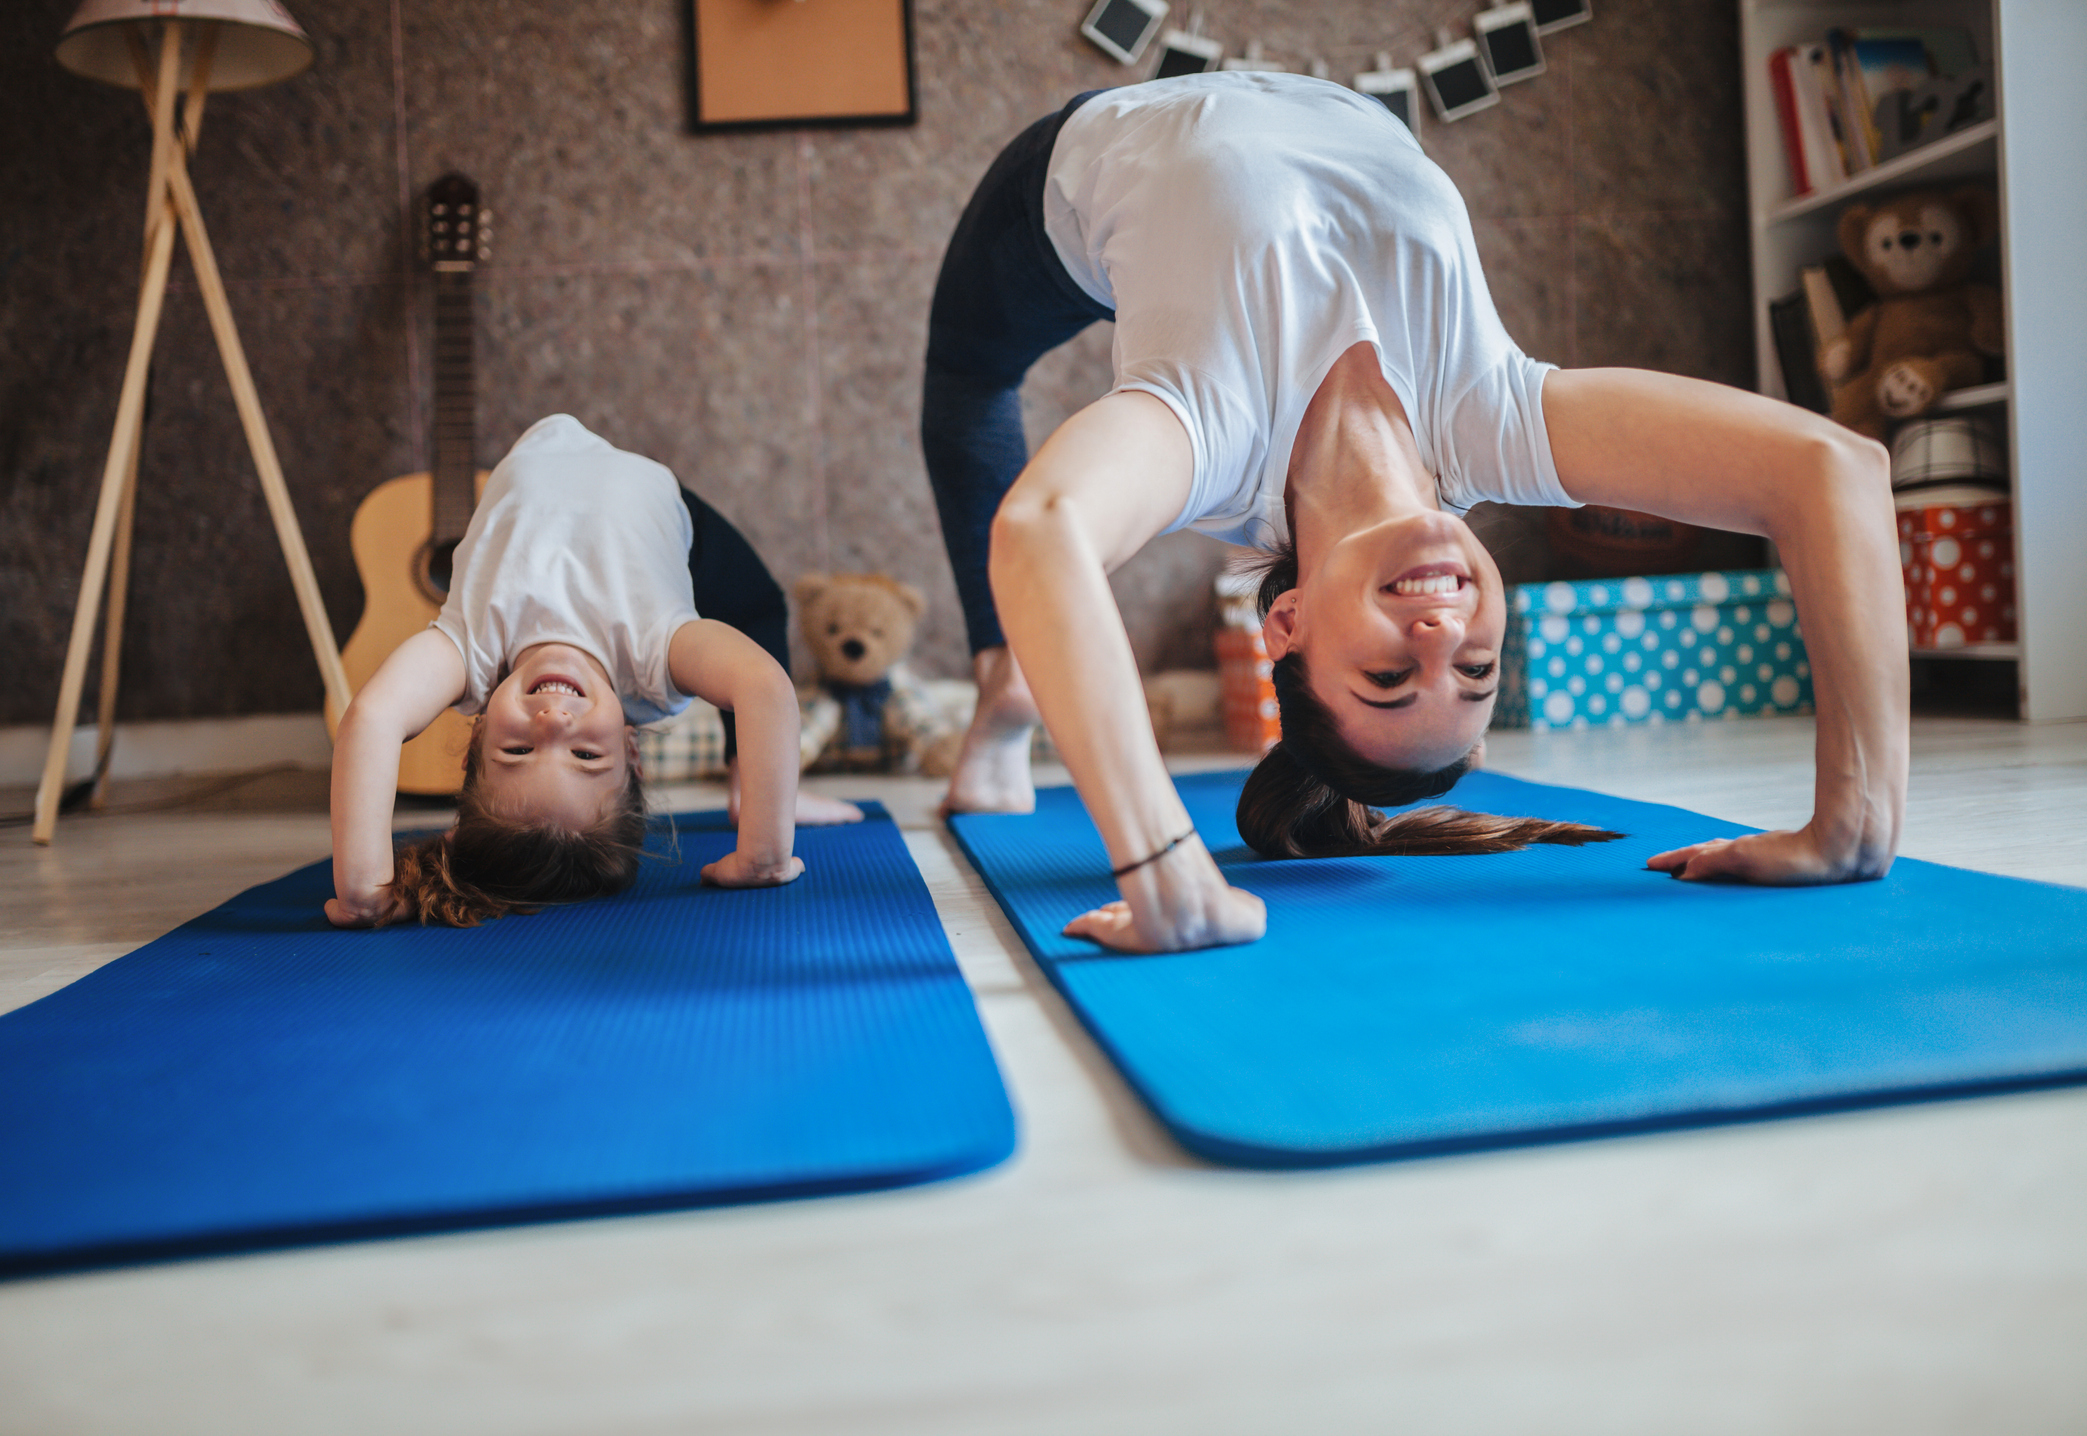 Why Stretching Is Important For Your Child and How You Can Make It Fun